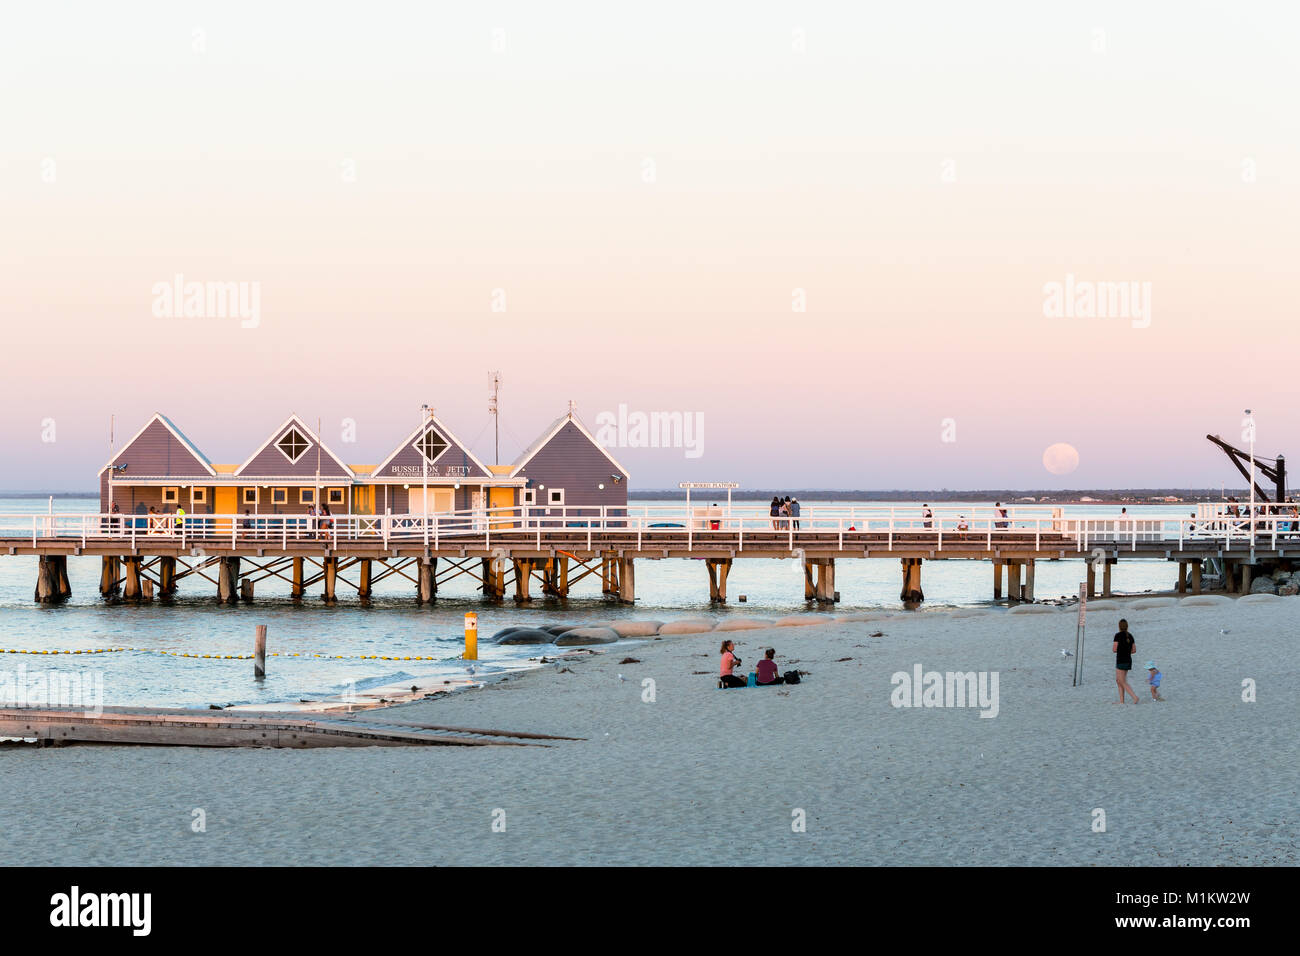 Busselton, Western Australia. 31st Janauary 2018. Super moon rising above Busselton Jetty.  This moon will turn red during a lunar eclipse later in the evening. Credit: Chris de Blank/Alamy Live News Credit: Chris de Blank/Alamy Live News Stock Photo